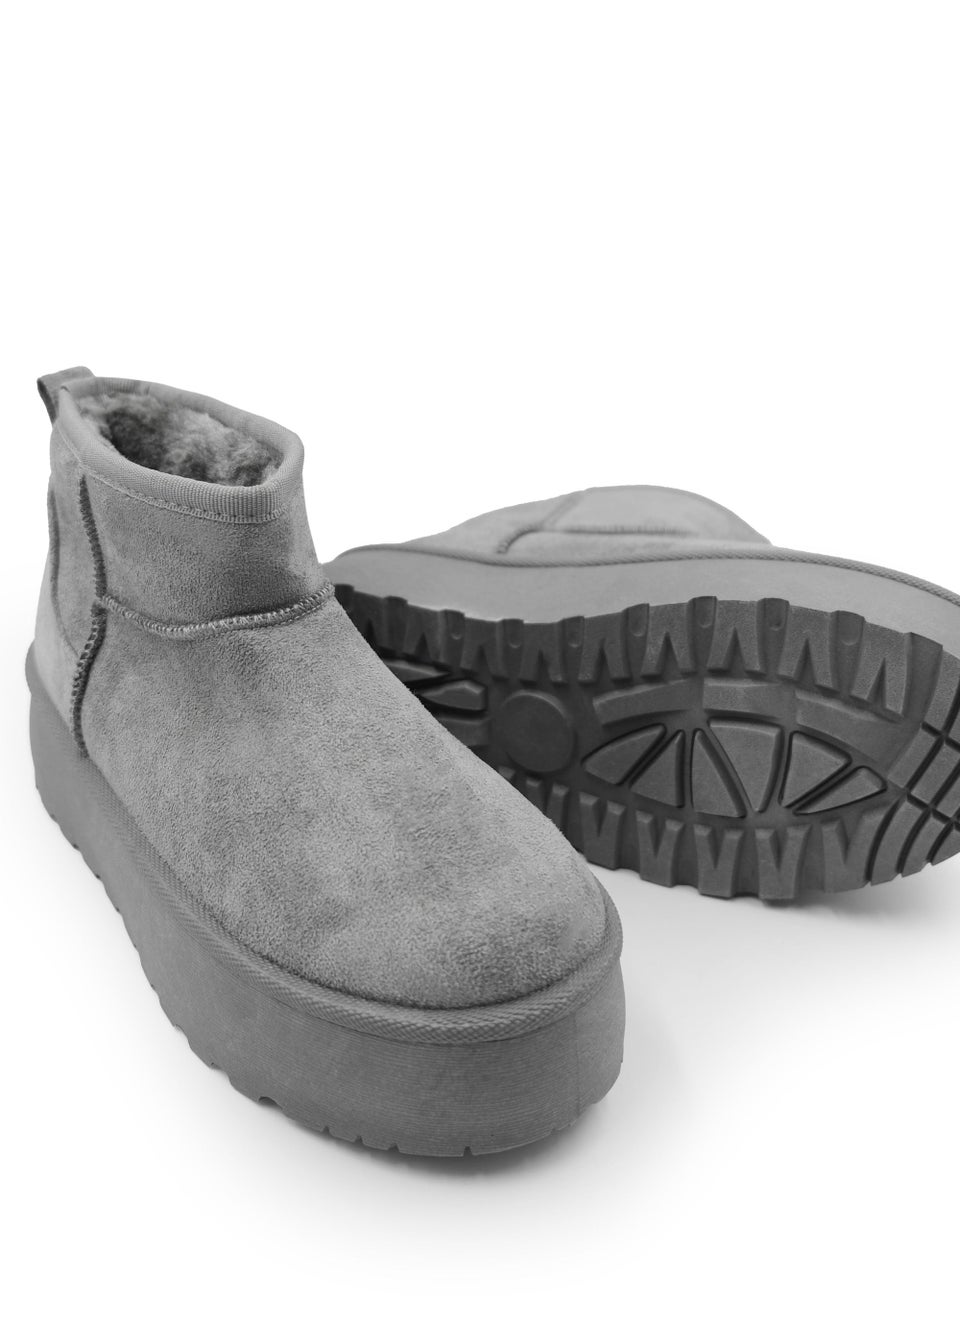 Where's That From Grey Suede Erica Slip On Ankle Boots